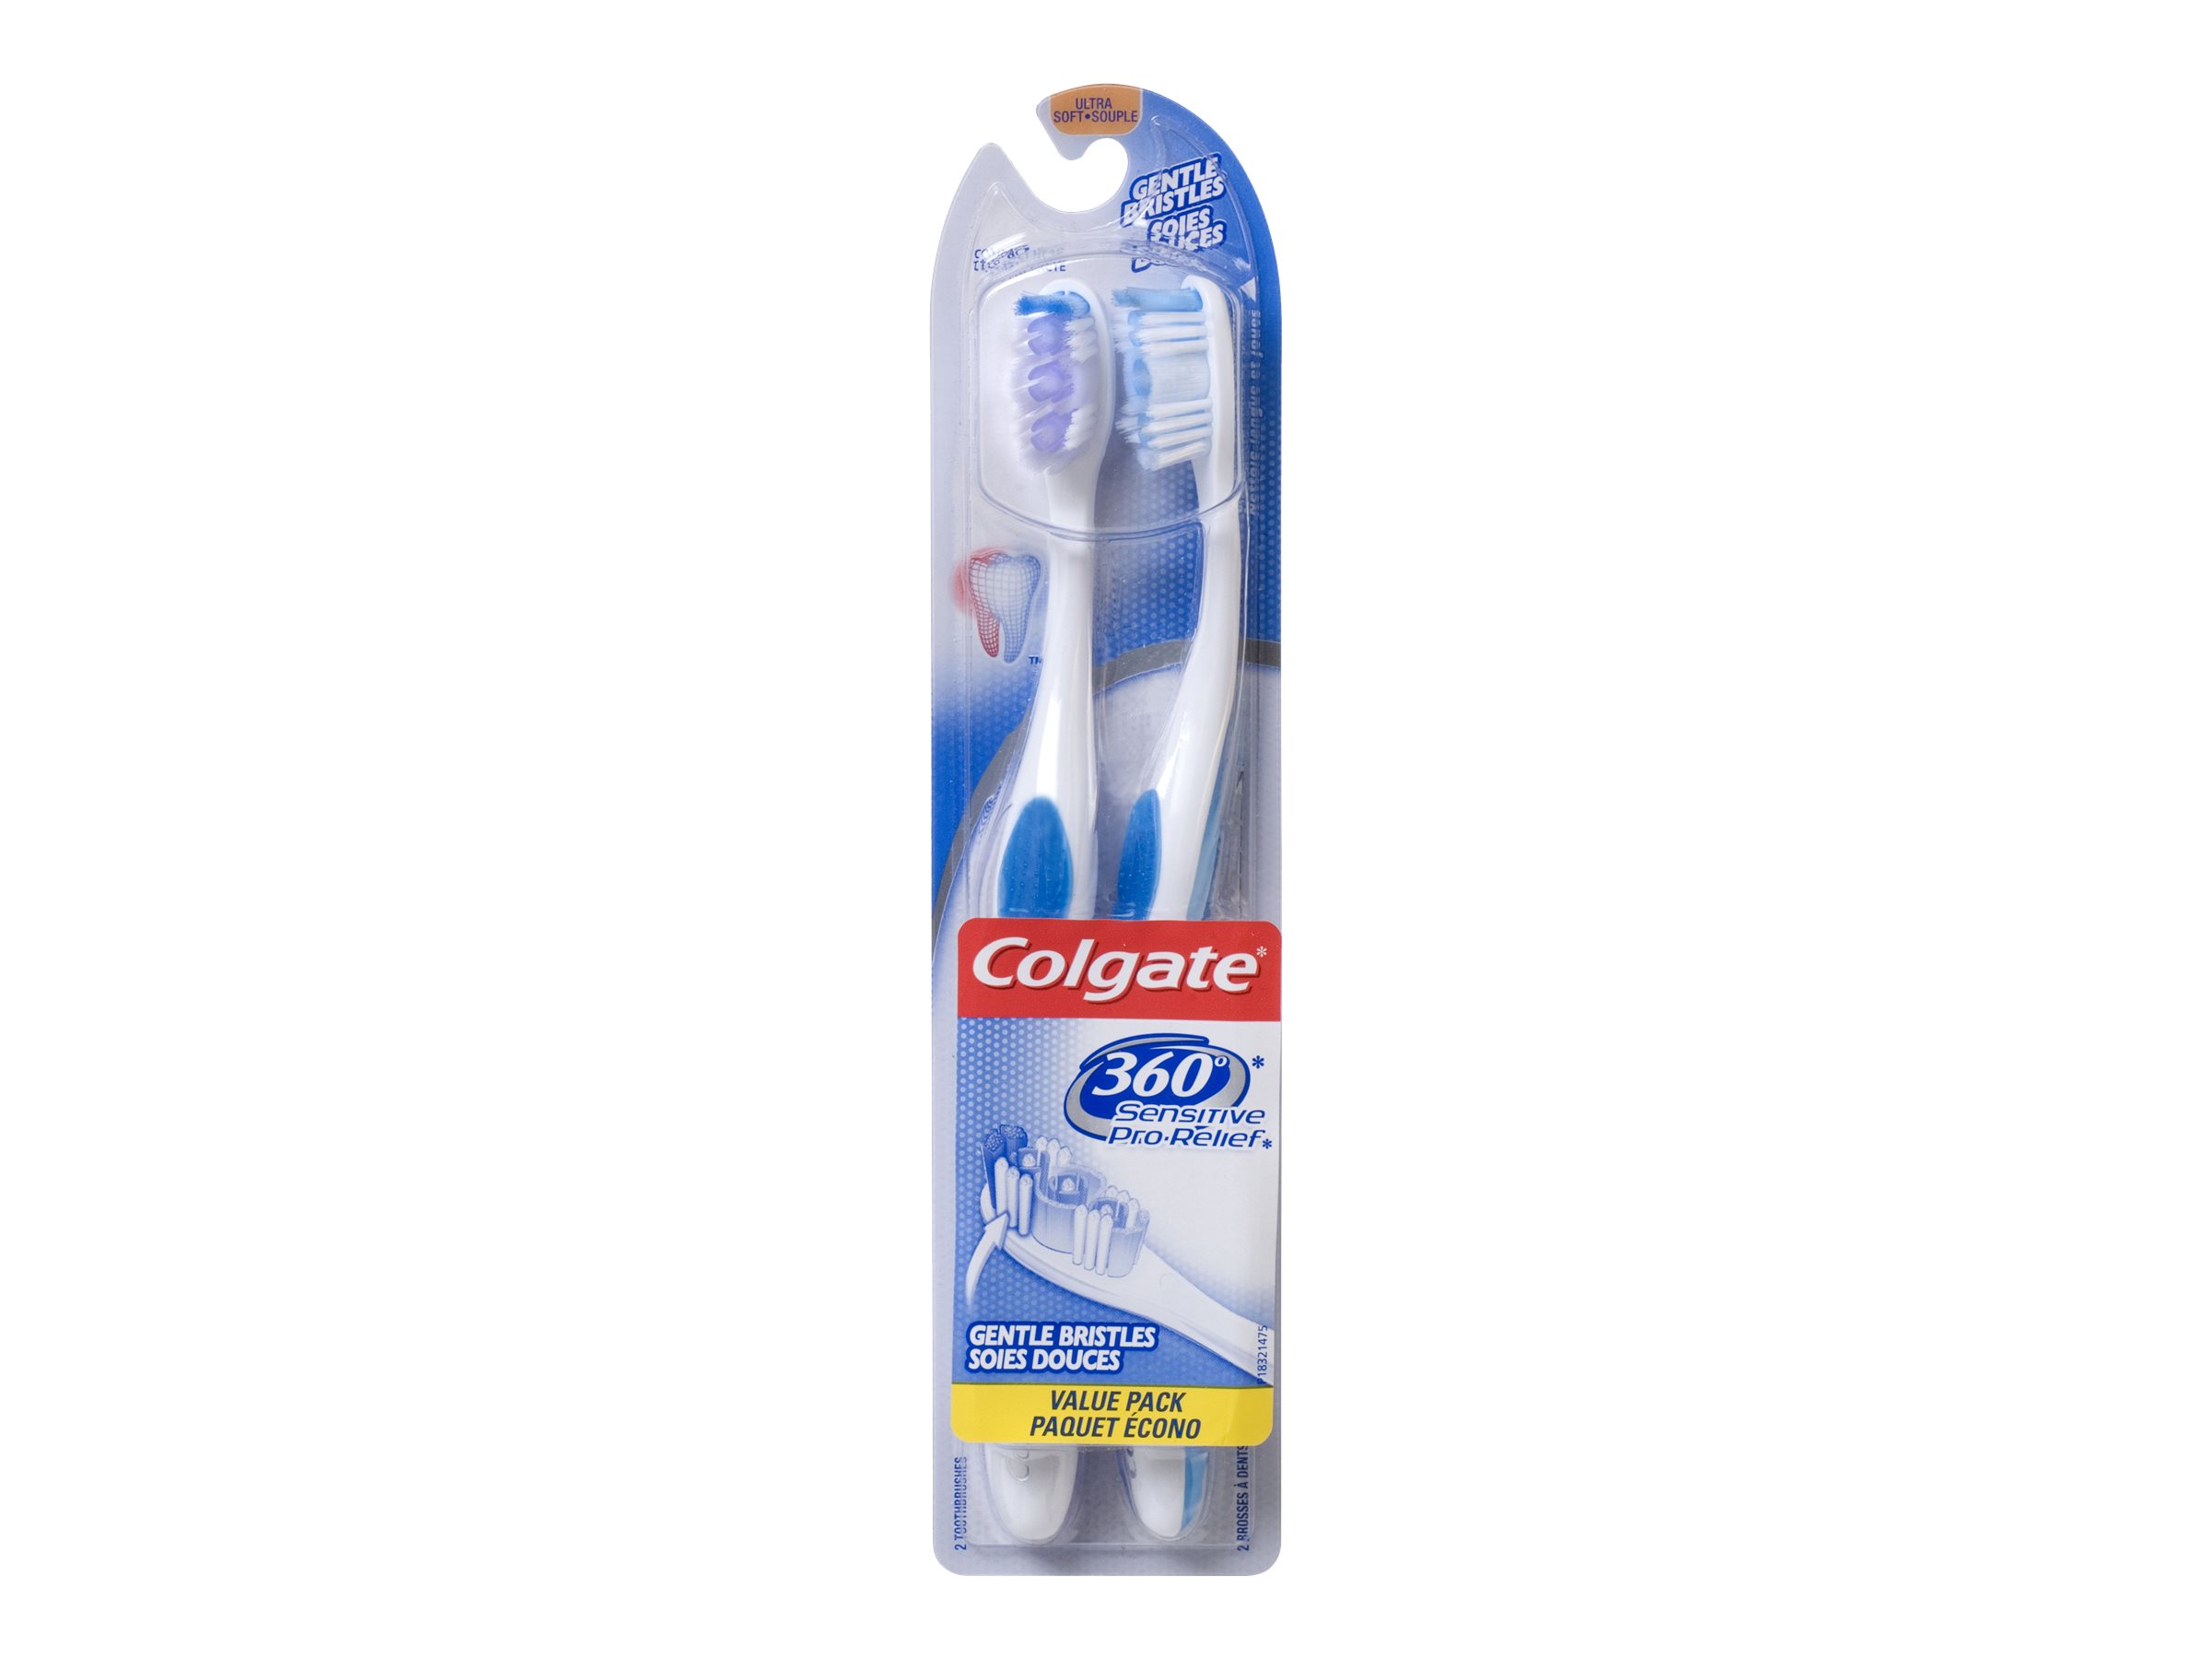 Colgate 360 Sensitive Pro-Relief Toothbrush - Ultra Soft - 2 pack